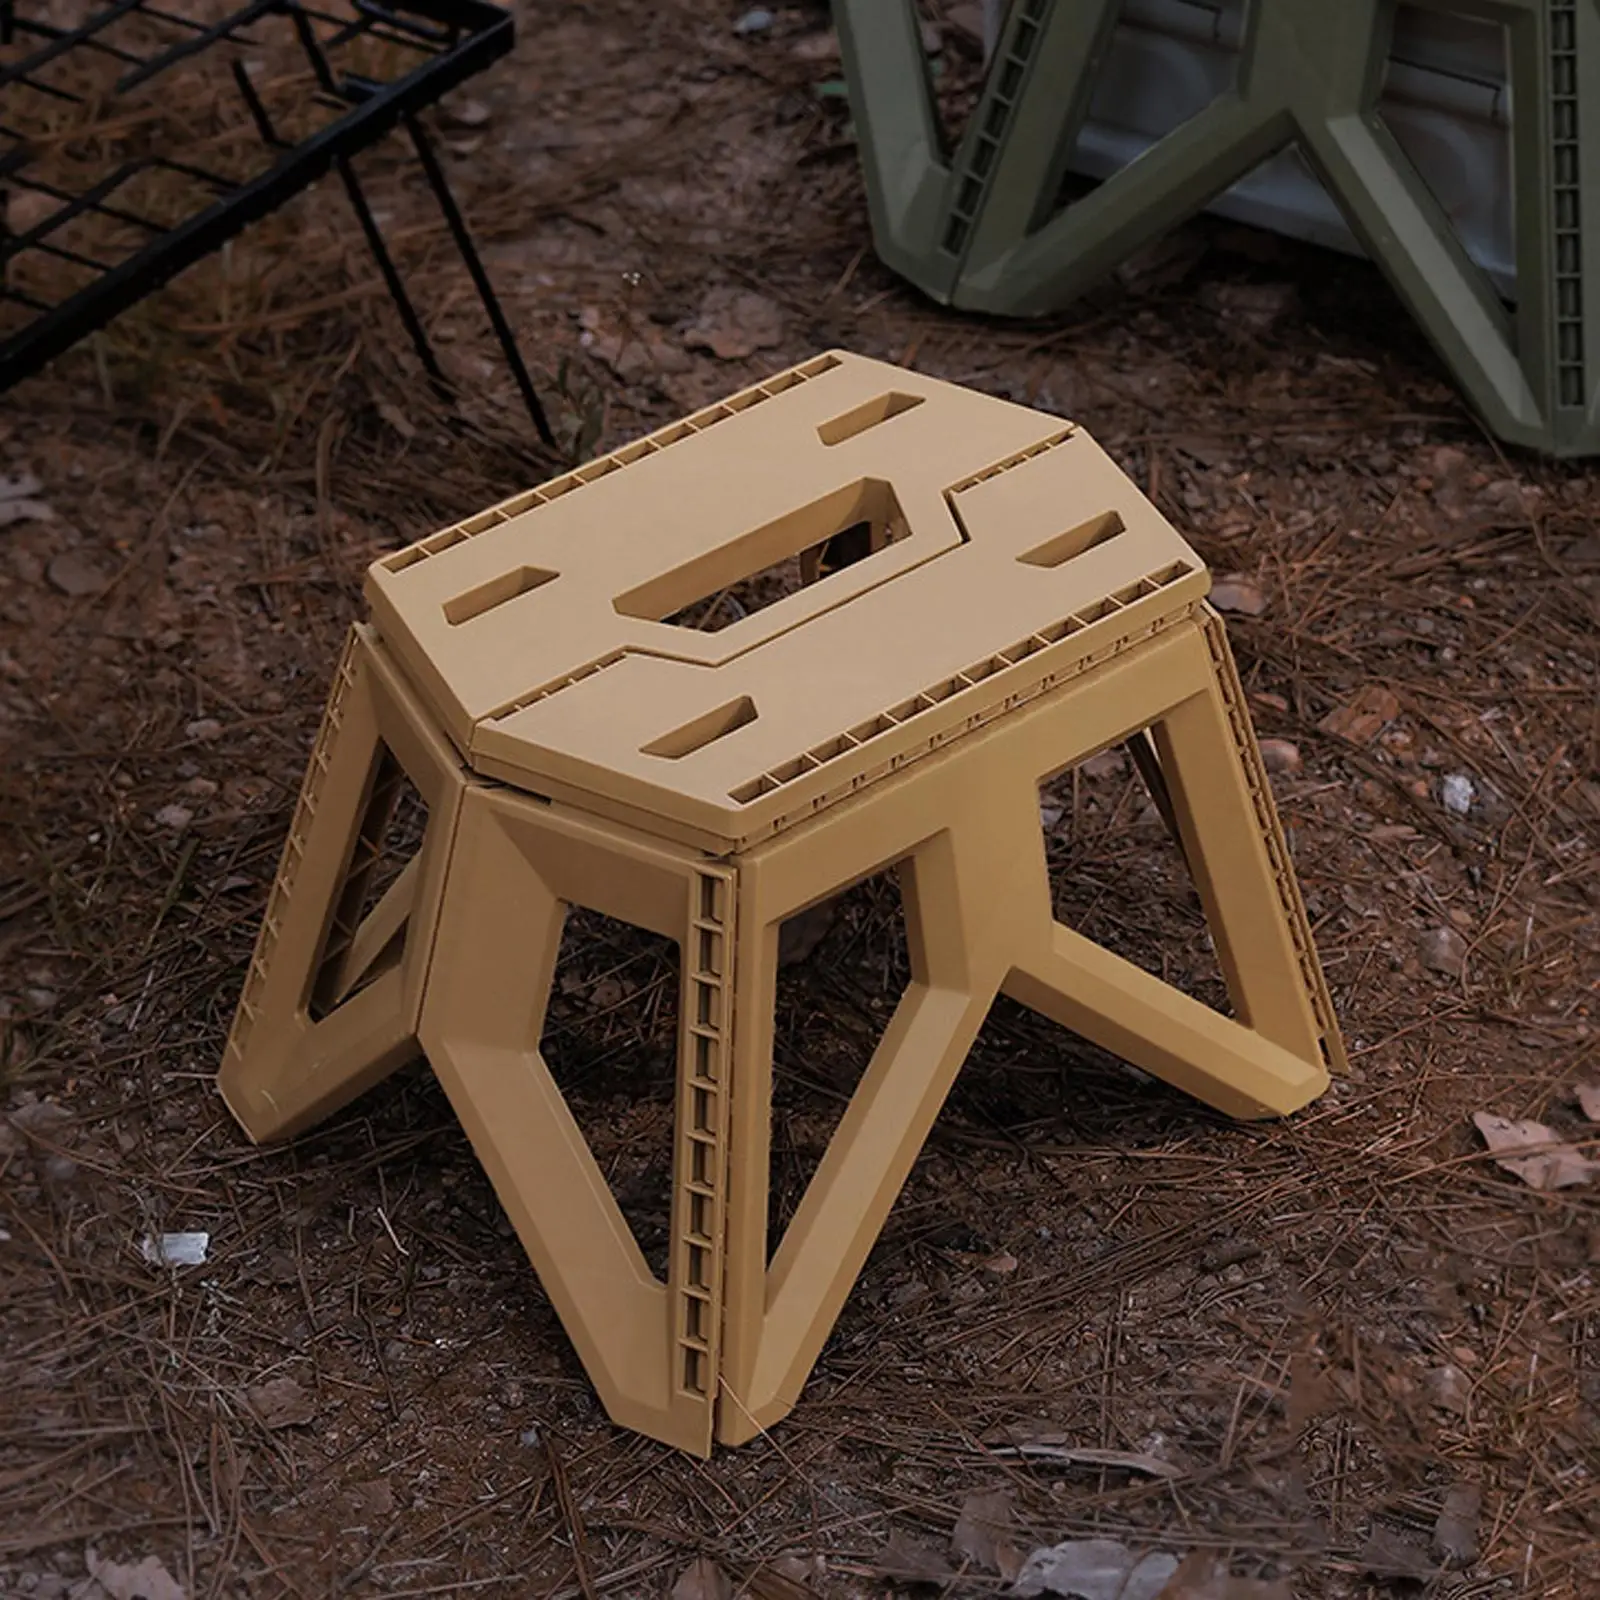 Collapsible Foldable Stool Camping Chair Plastic Garden Seat Picnic Outdoor